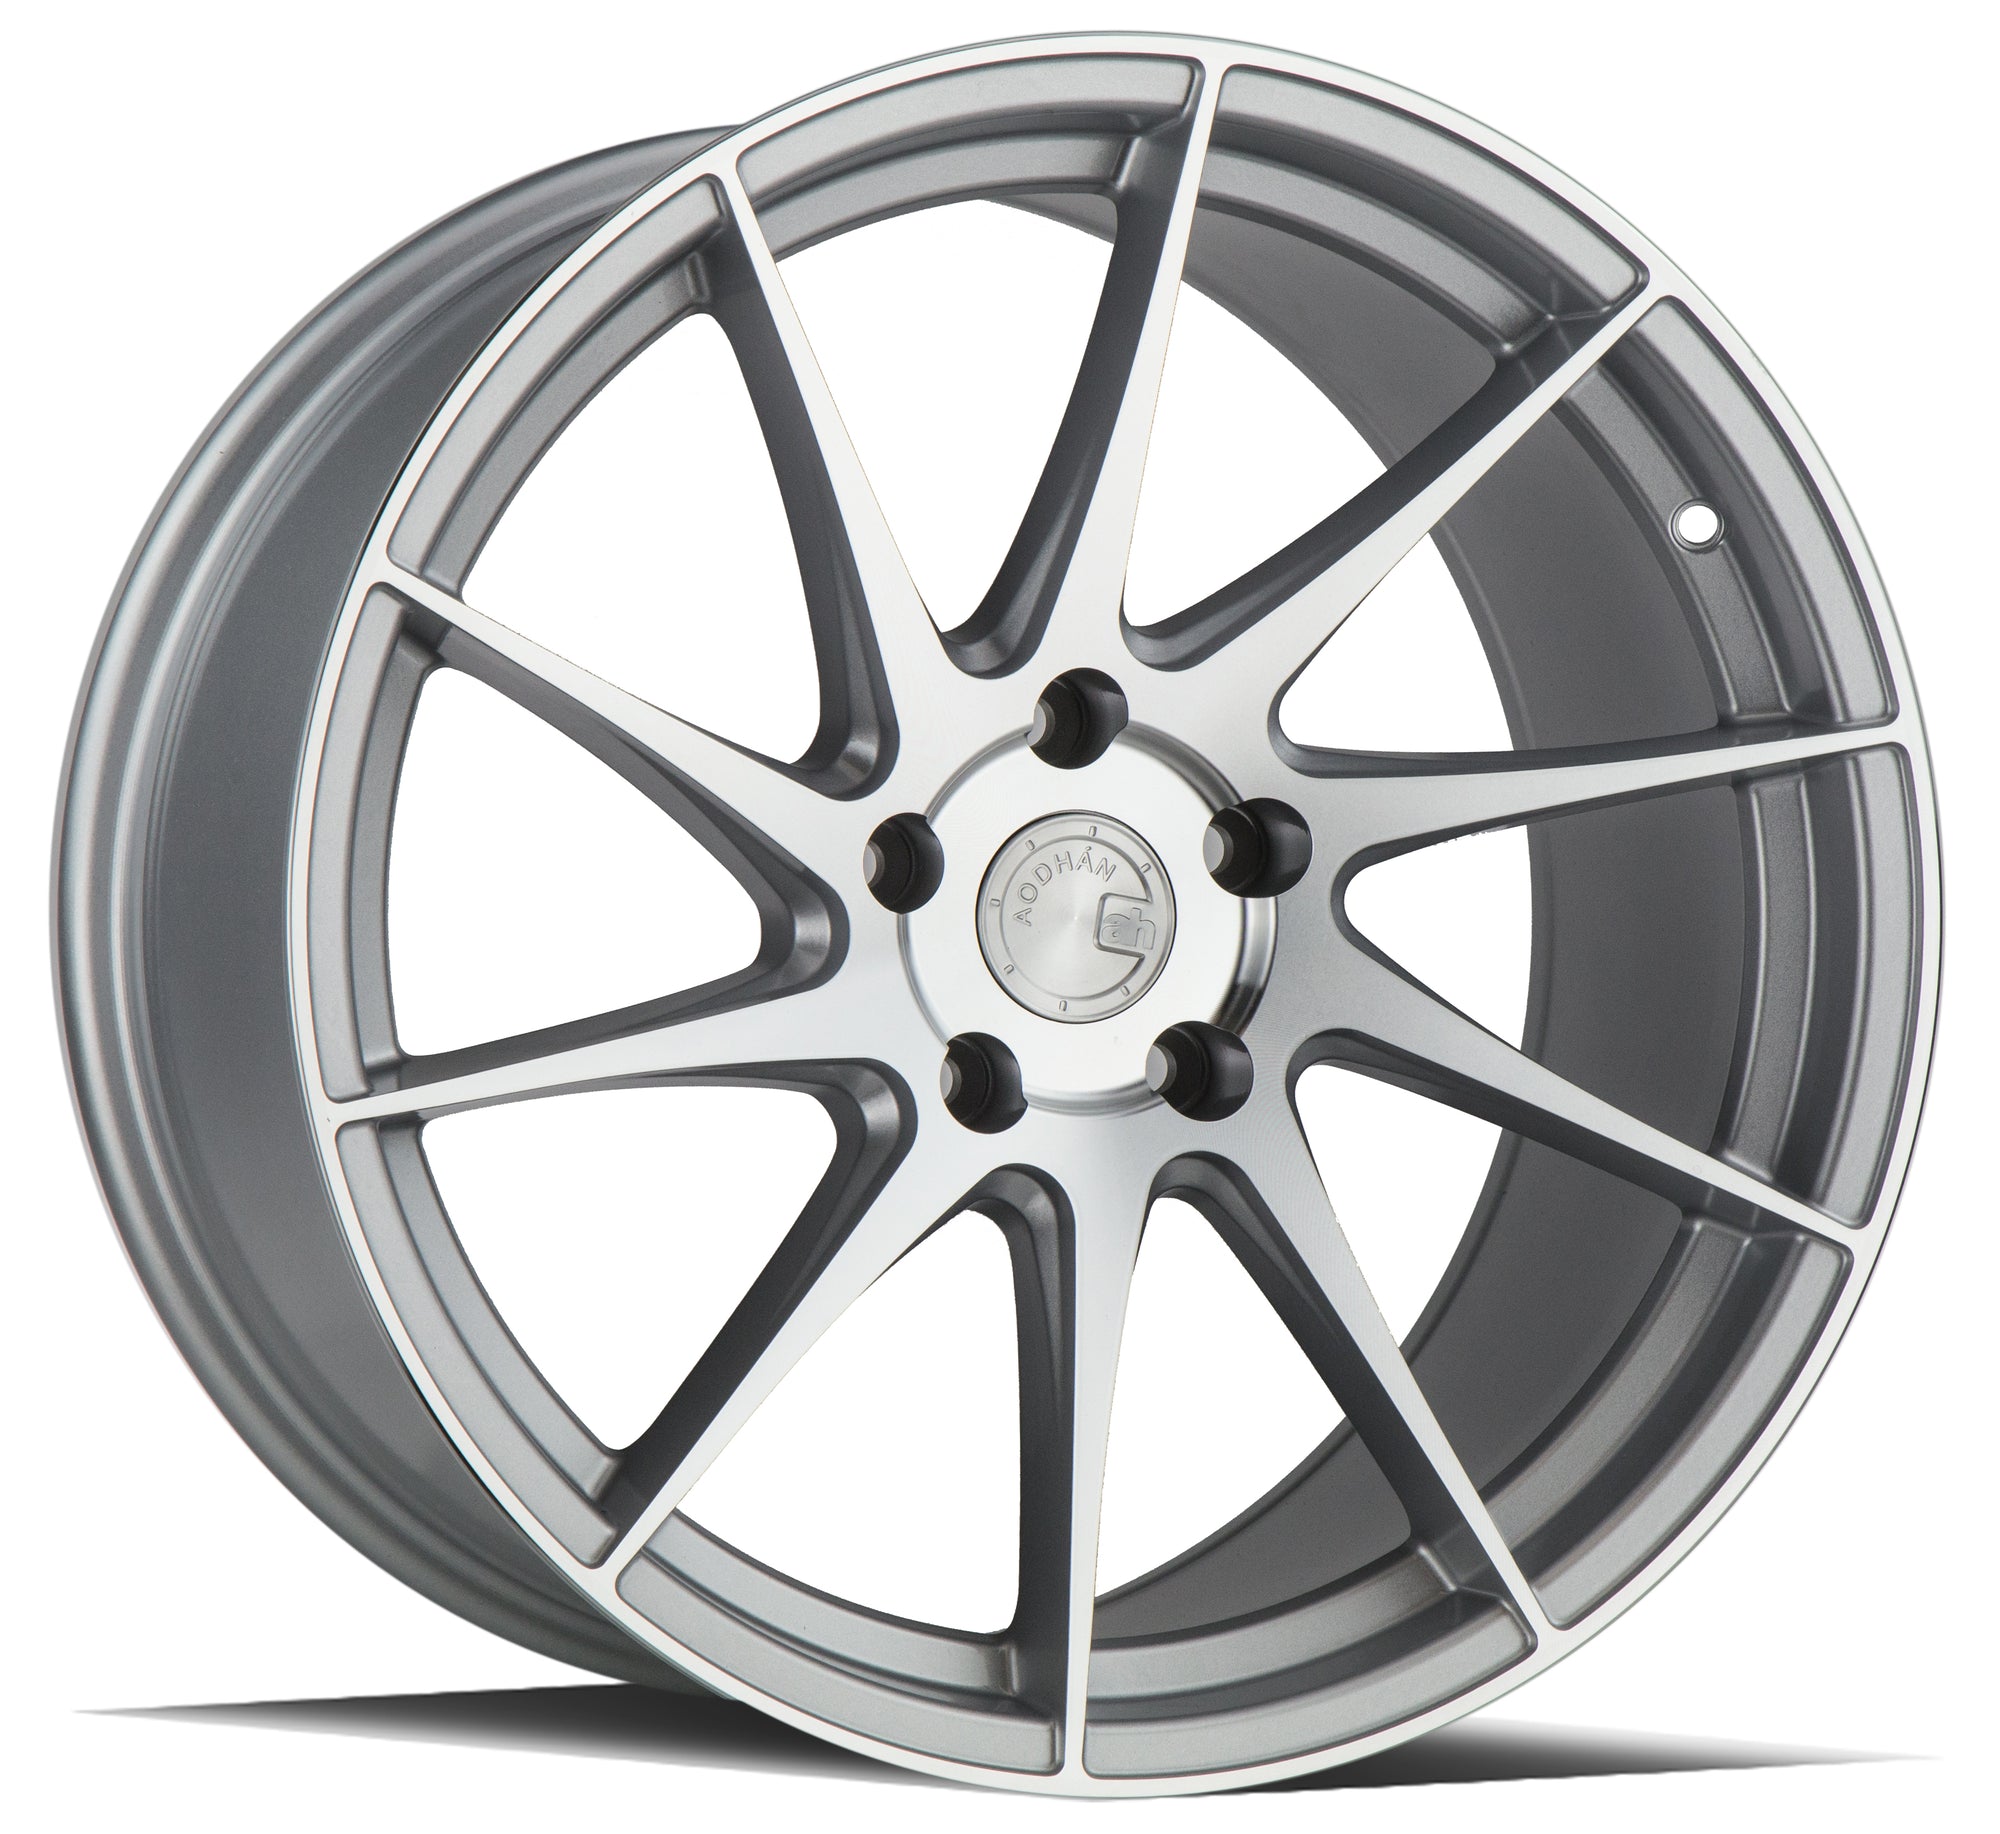 Aodhan AH09 18x8.5 (Driver Side) 5x114.3 +35 Gloss Silver Machined Face